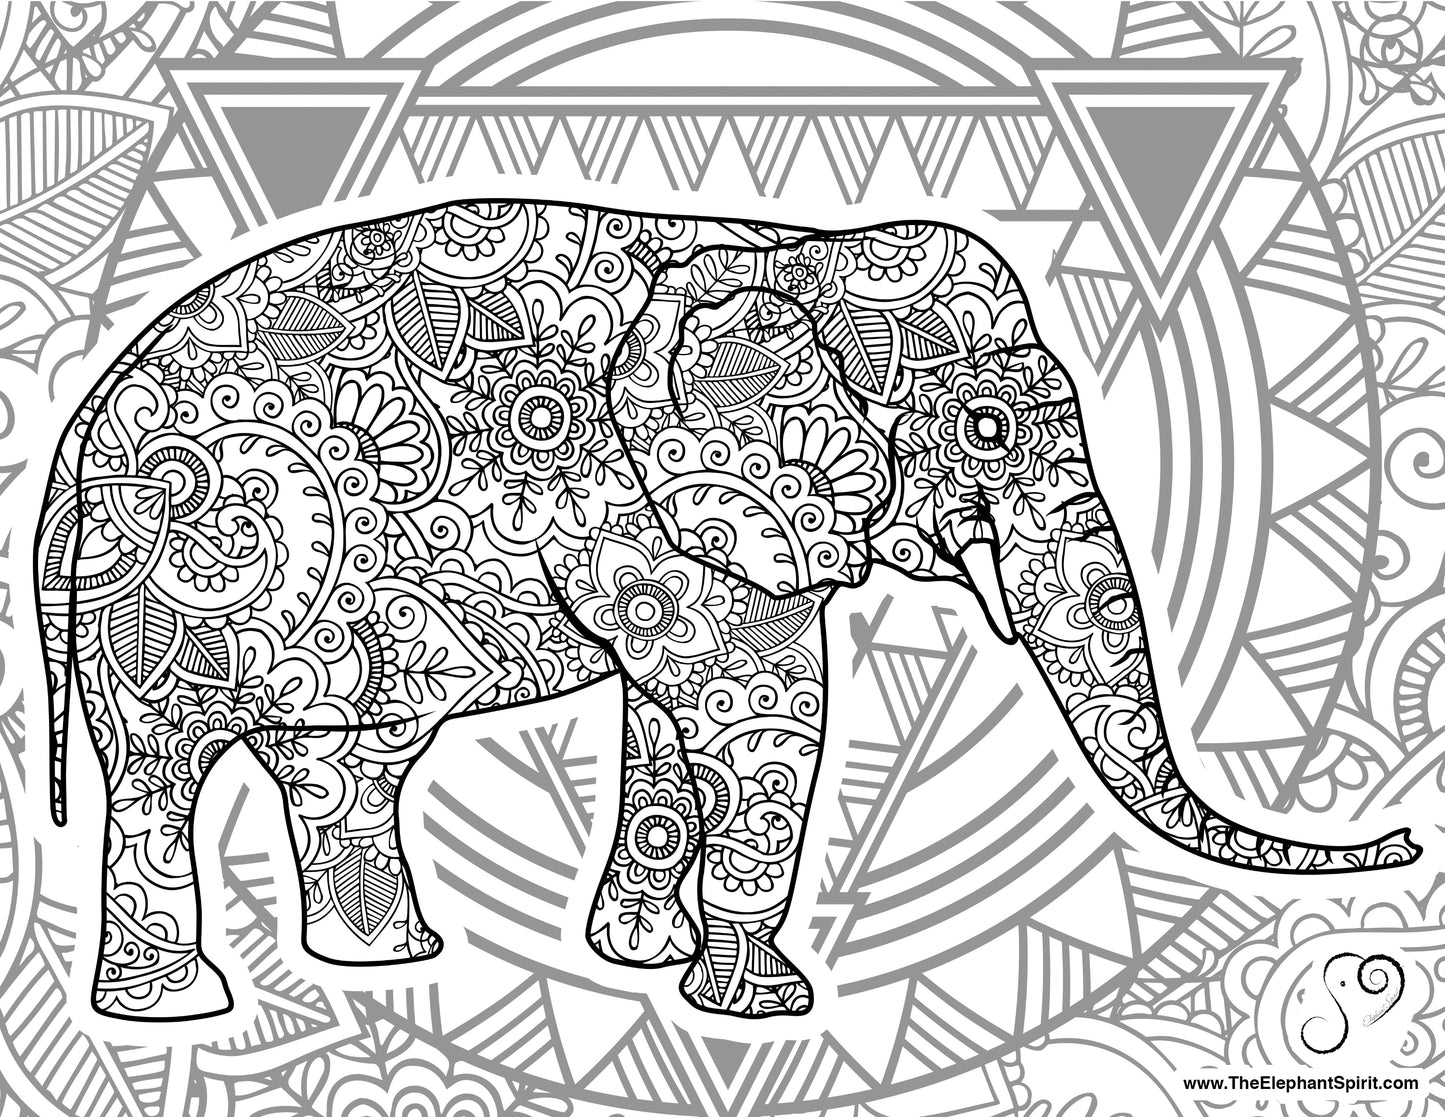 FREE Coloring Page 09-08